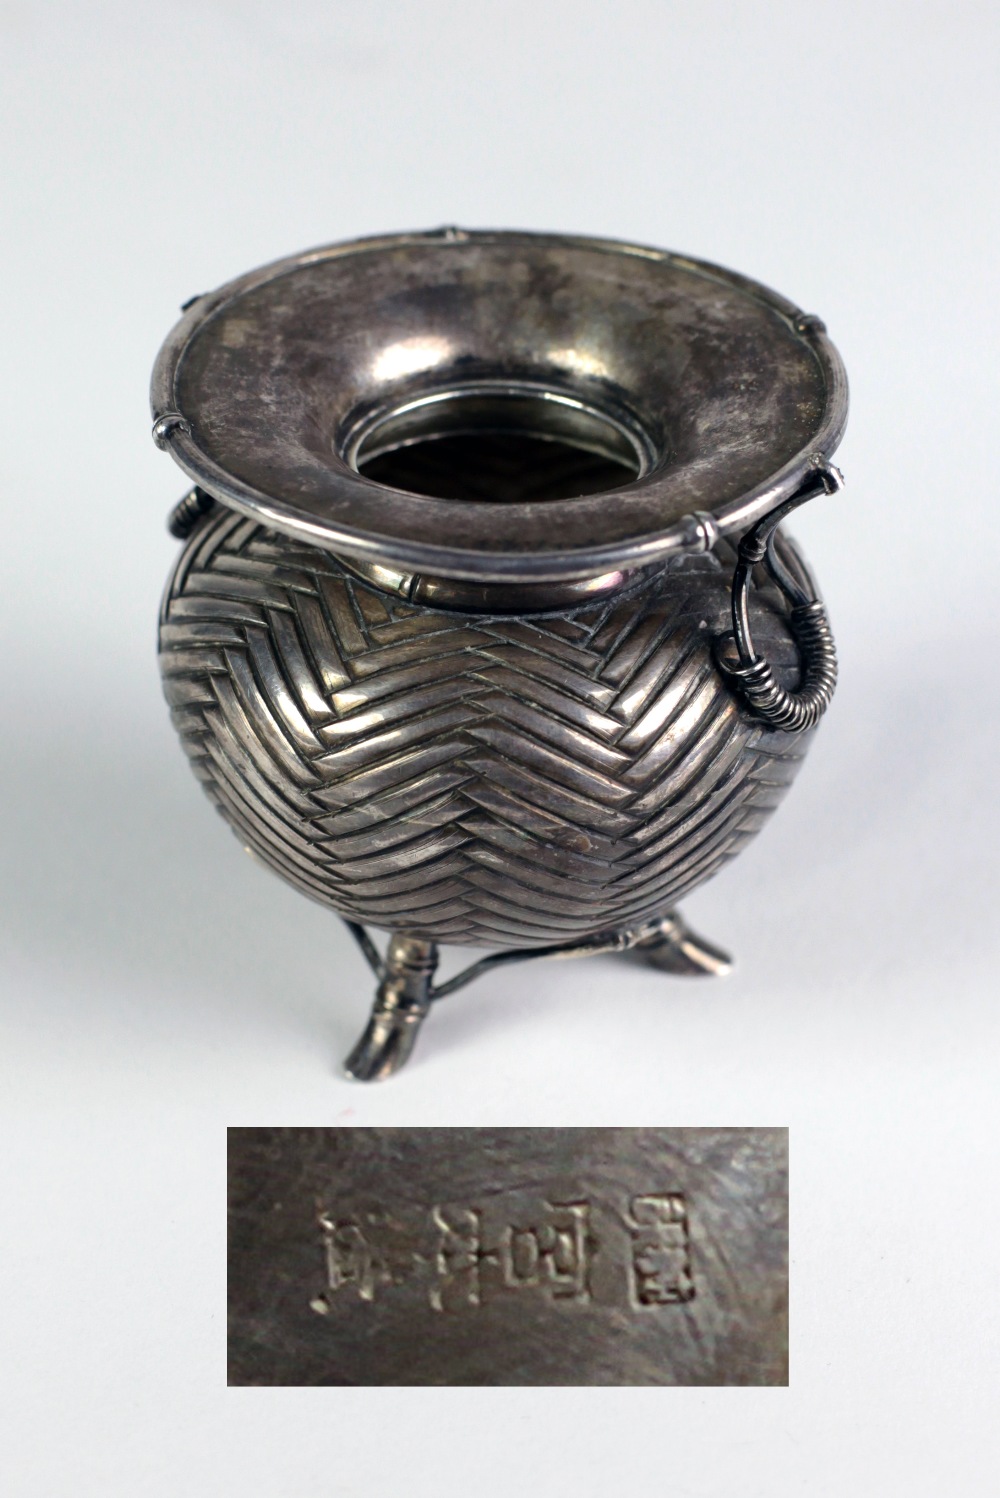 A Chinese silver Pot, with two handles on a simulated basket weave body on three bamboo legs, 7.